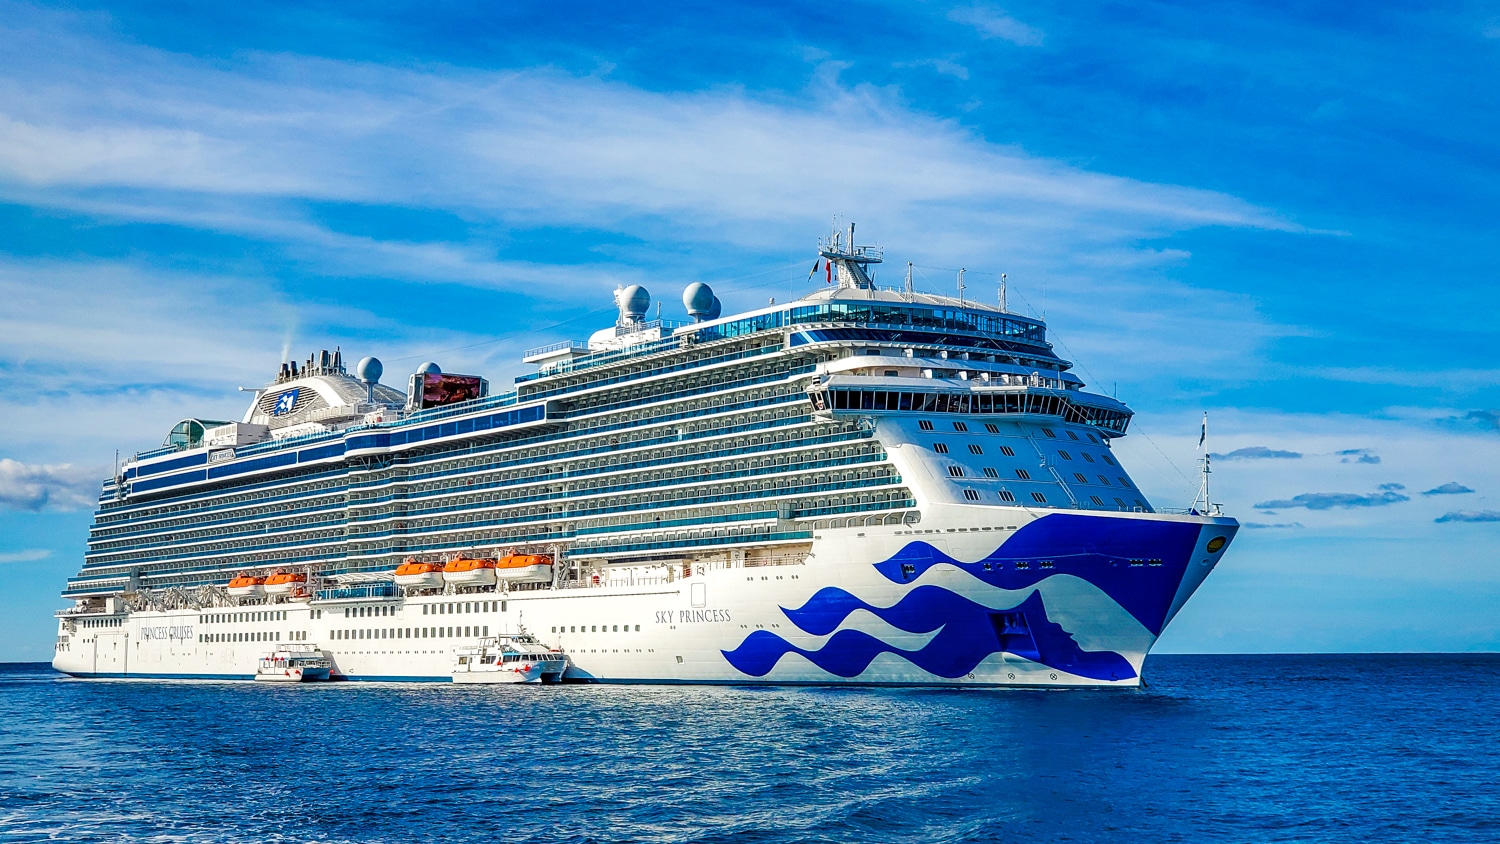 All Princess Cruise Ships Will Have WiFi on Return to Service